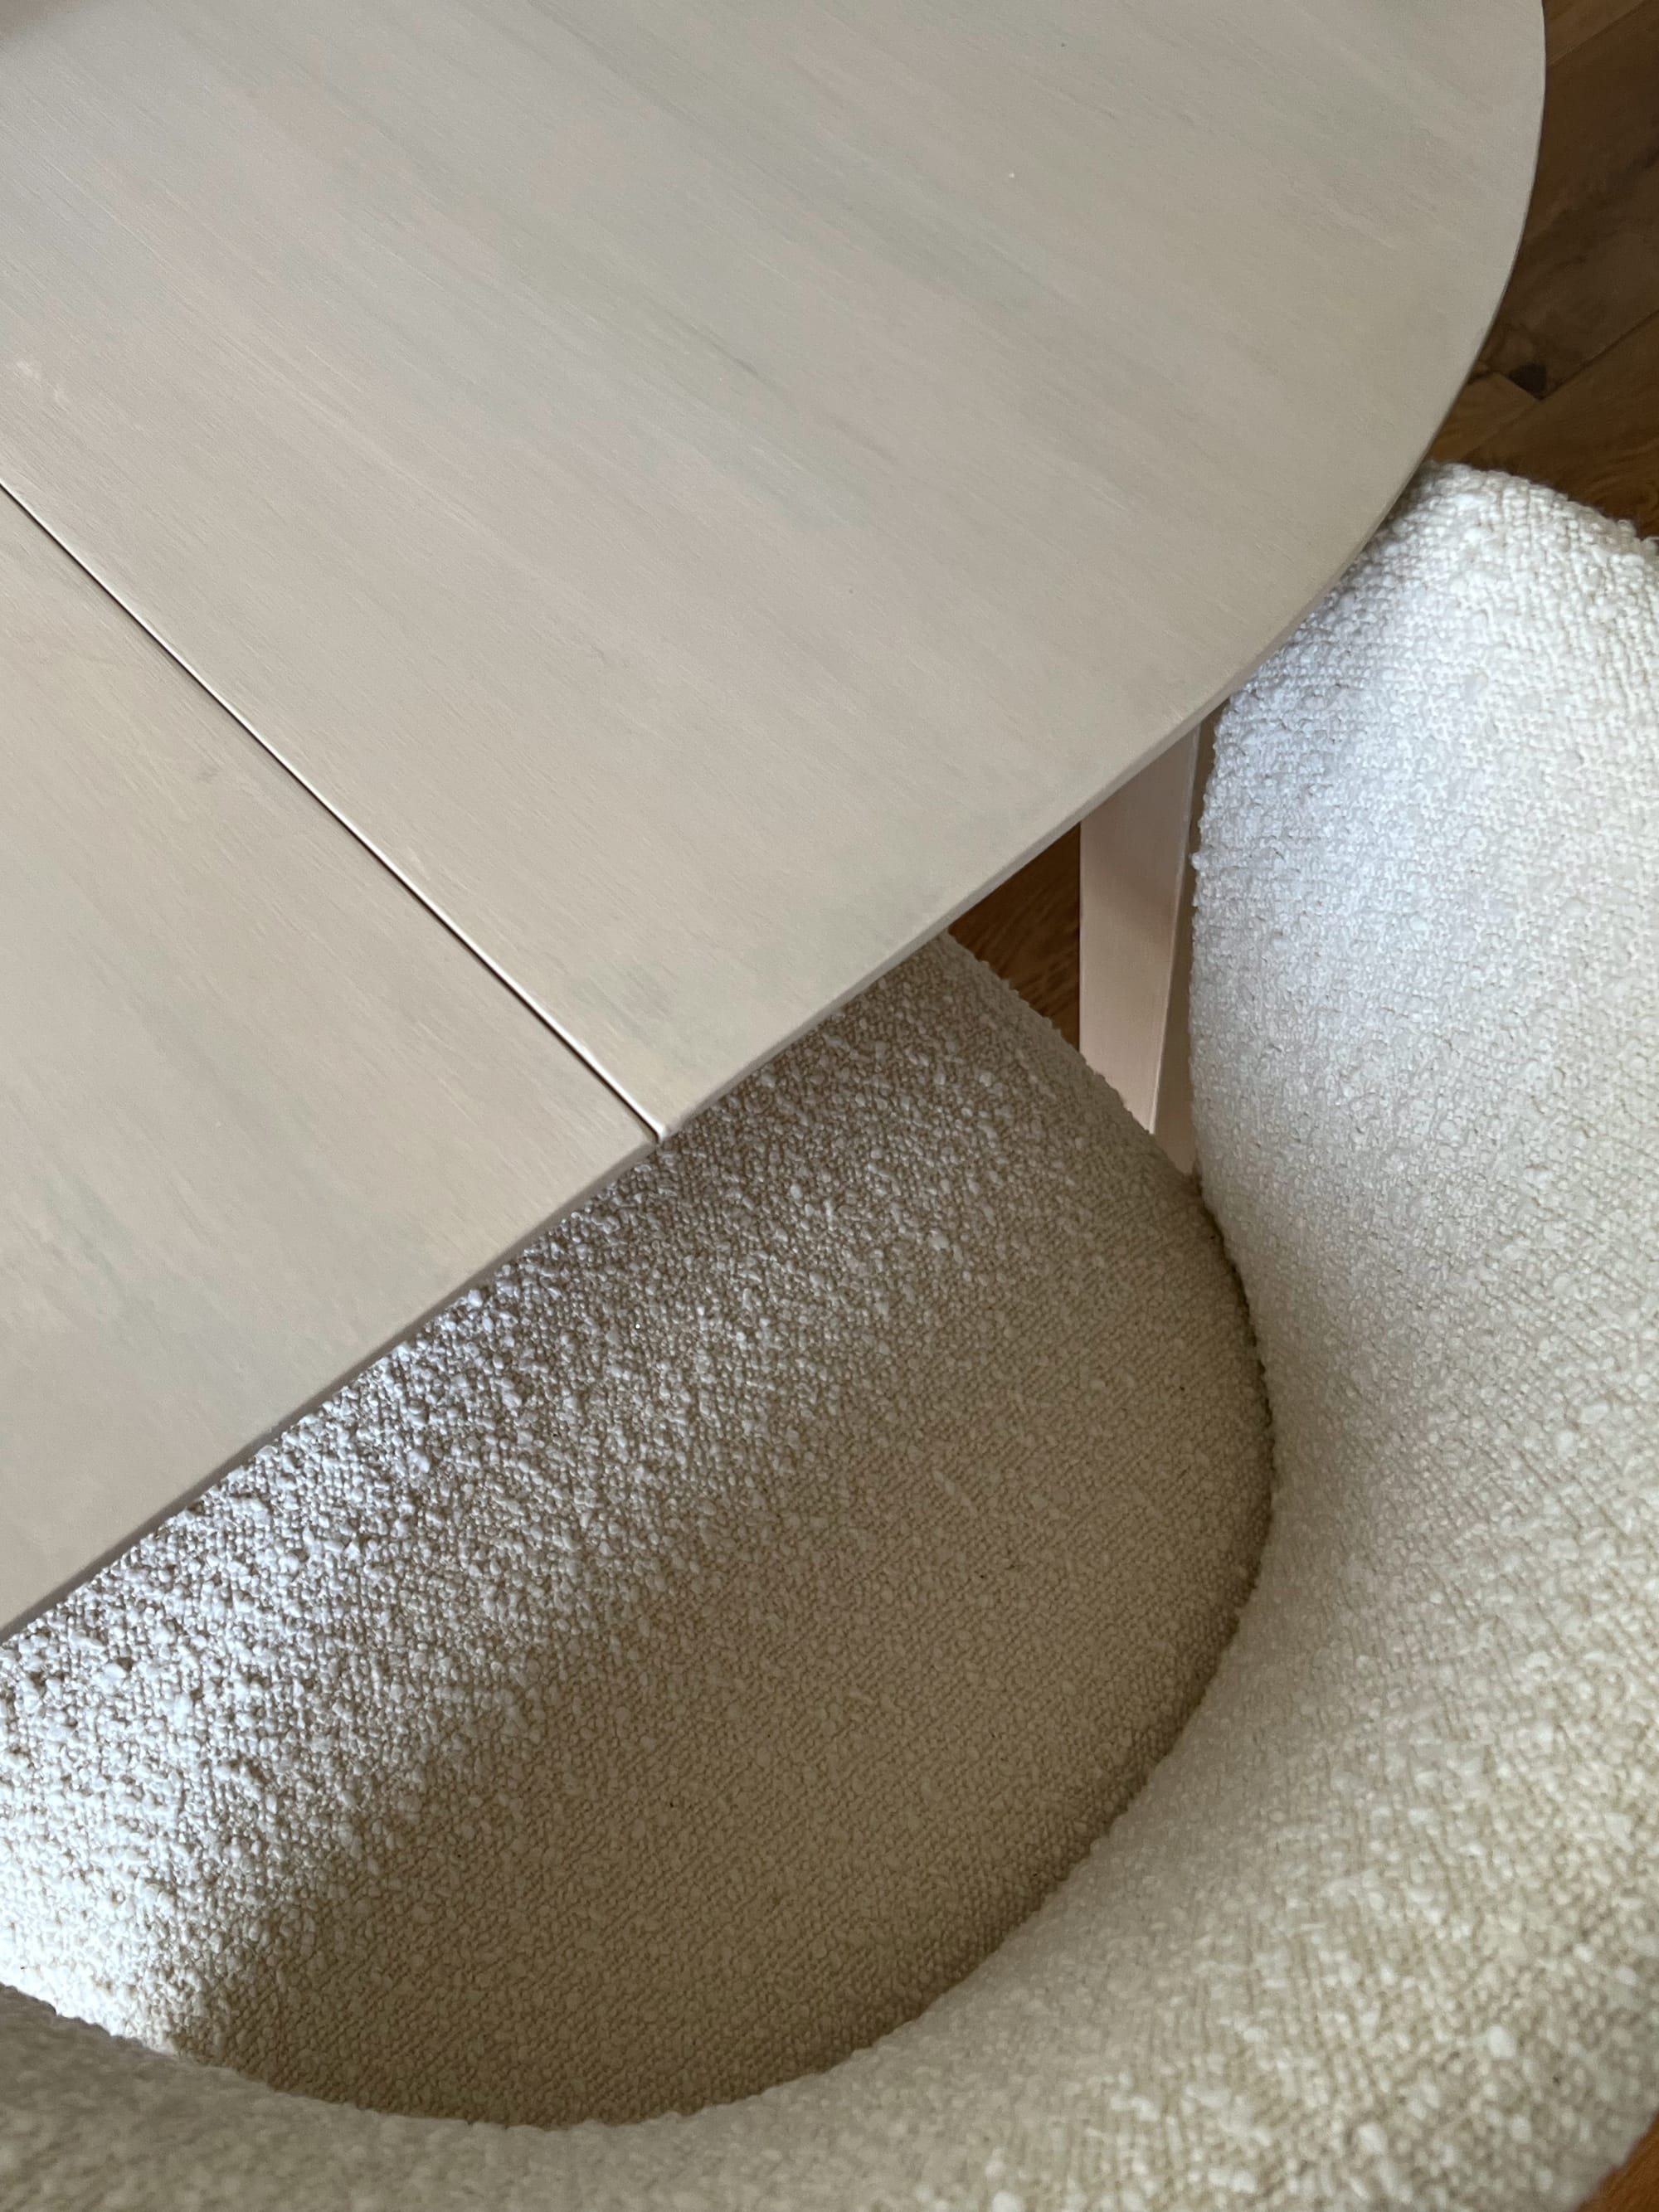 DINING TABLE REPAINT